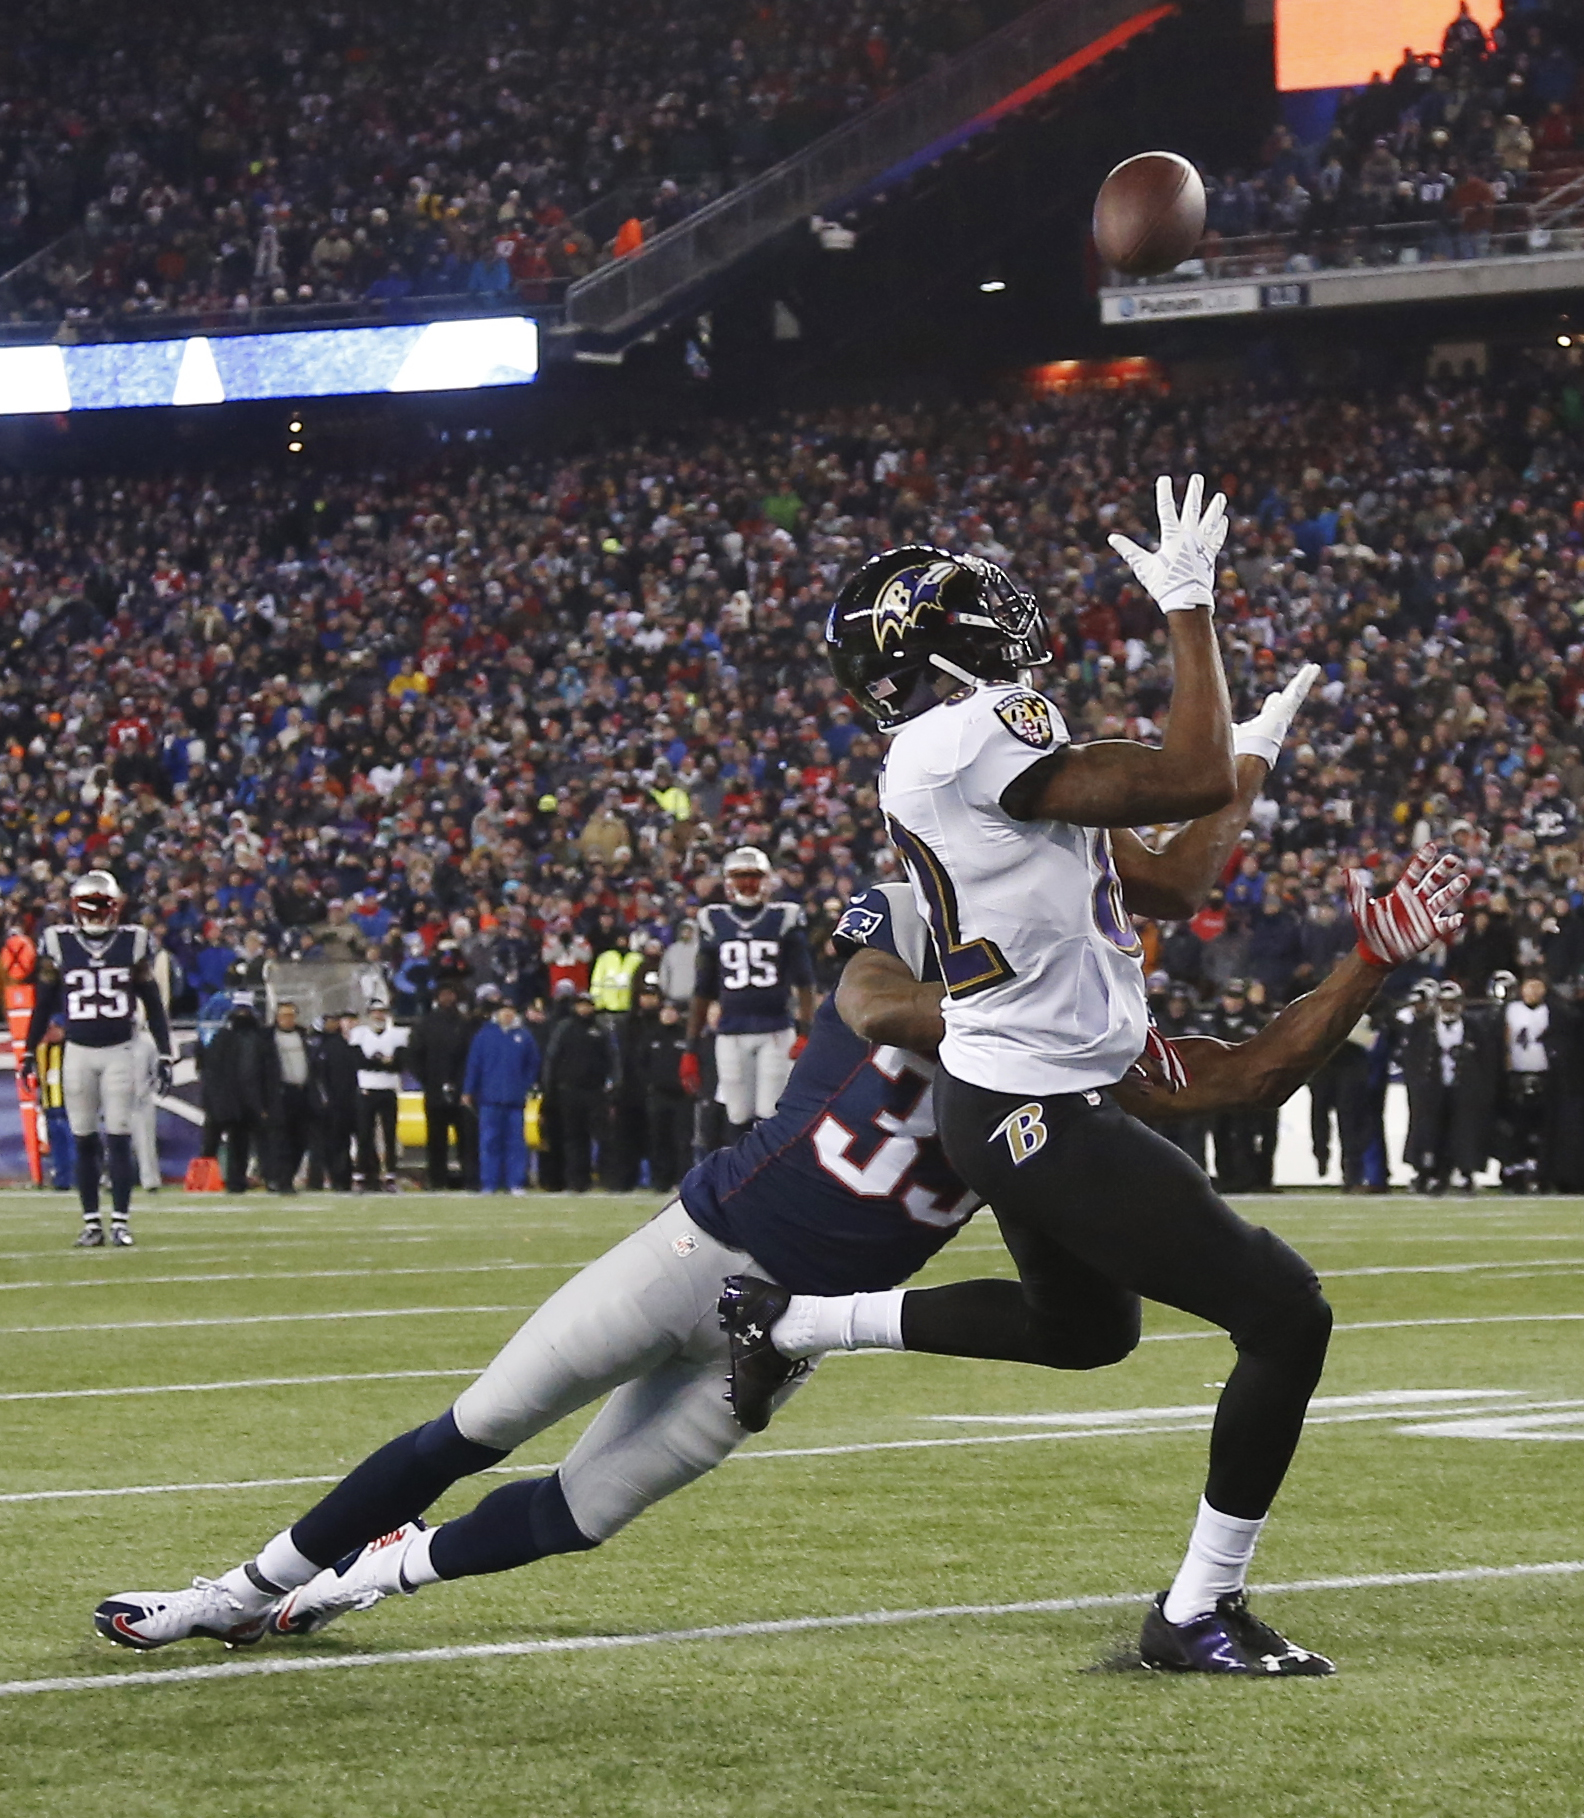 Baltimore Ravens wide receiver Torrey Smith (82) catches a pass in front of New England Patriots cornerback Brandon Browner (39) in the second half of an NFL divisional playoff football game Saturday, Jan. 10, 2015, in Foxborough, Mass.